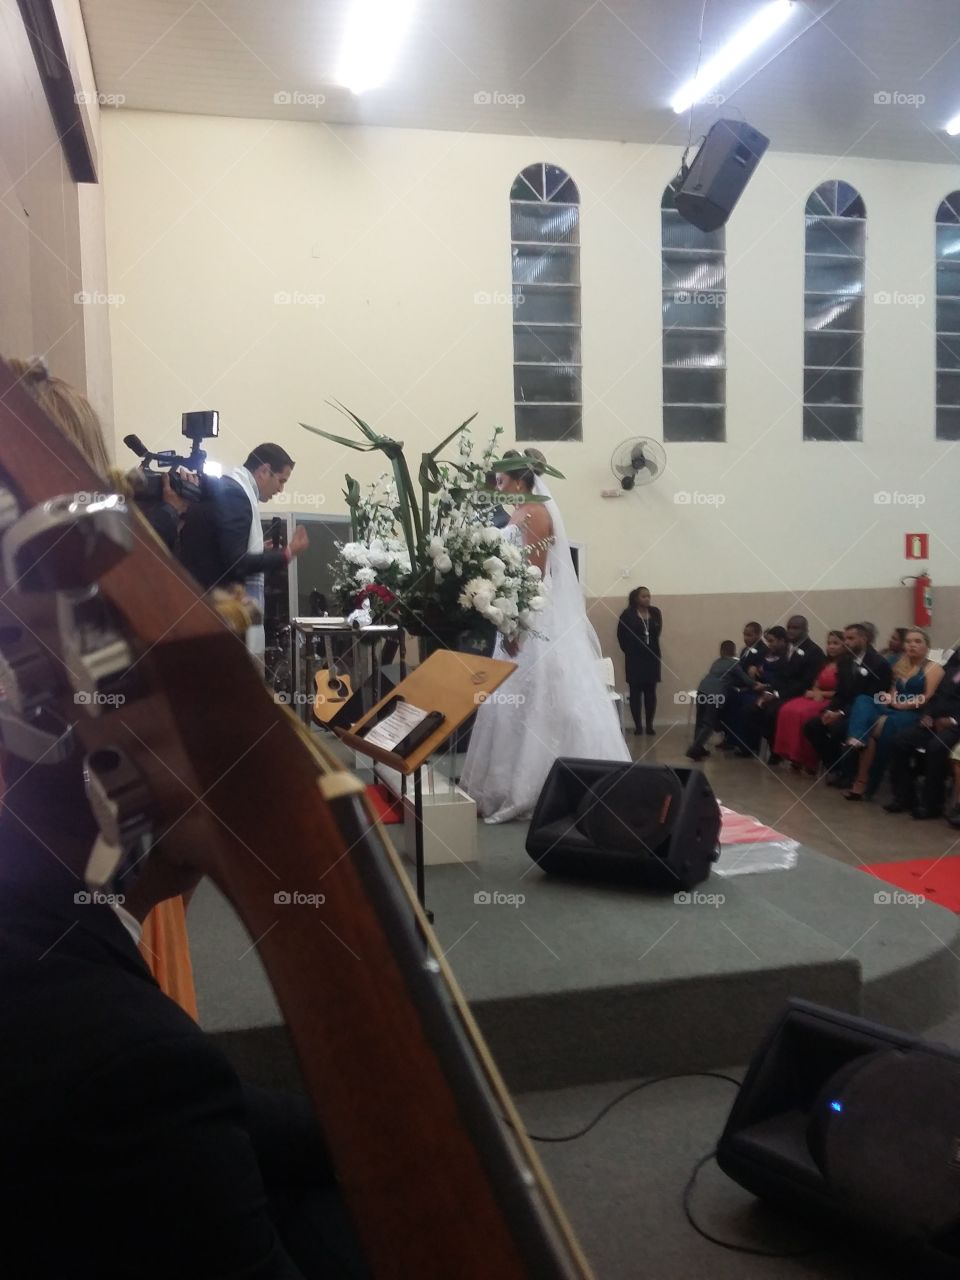 This day was wonderful, I played guitar at this wedding, I was very nervous, but it was cool because the couple liked it very much, so I was happy.